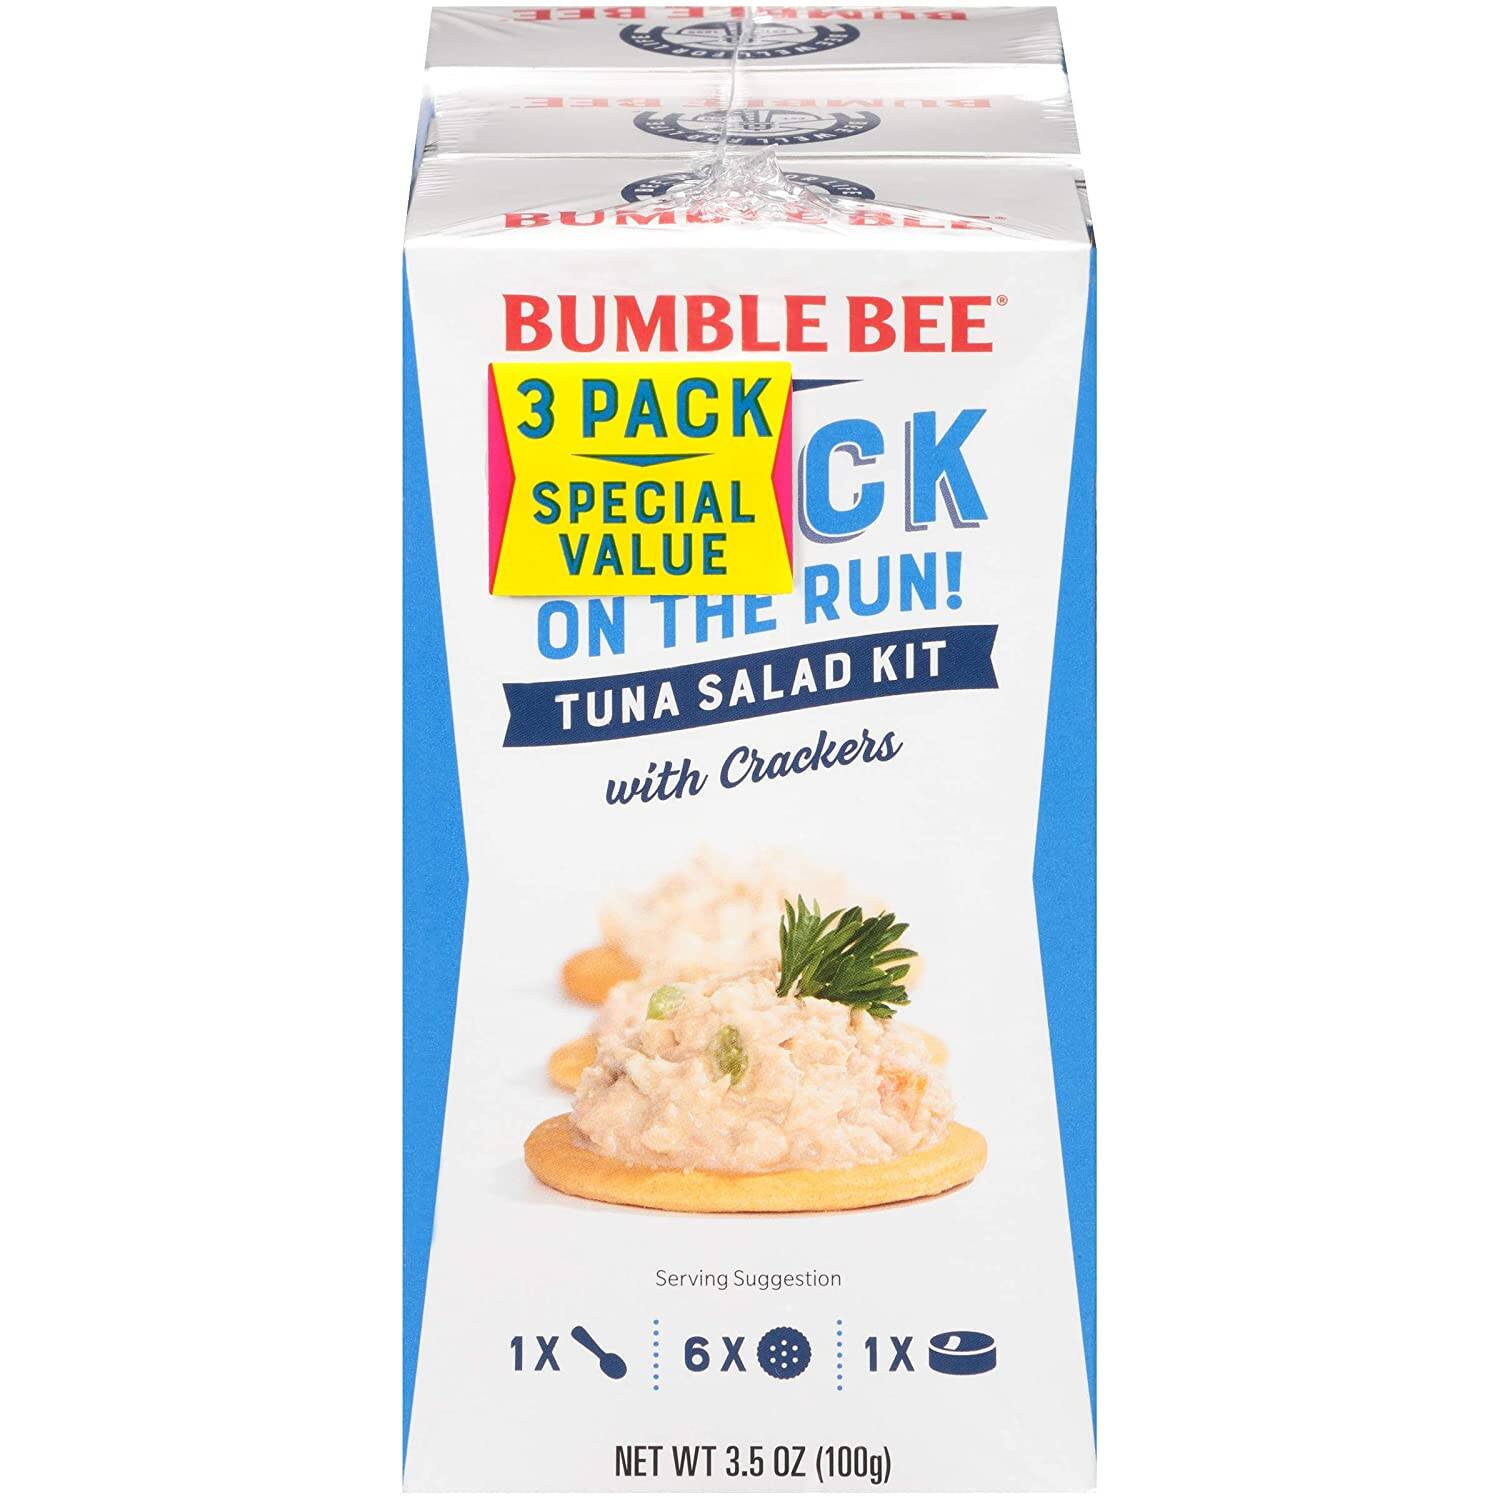 3-Pack 3.4-Oz Bumble Bee Snack On The Run! Tuna Salad with Crackers $2.20 + Free Shipping w/ Prime or on $25+